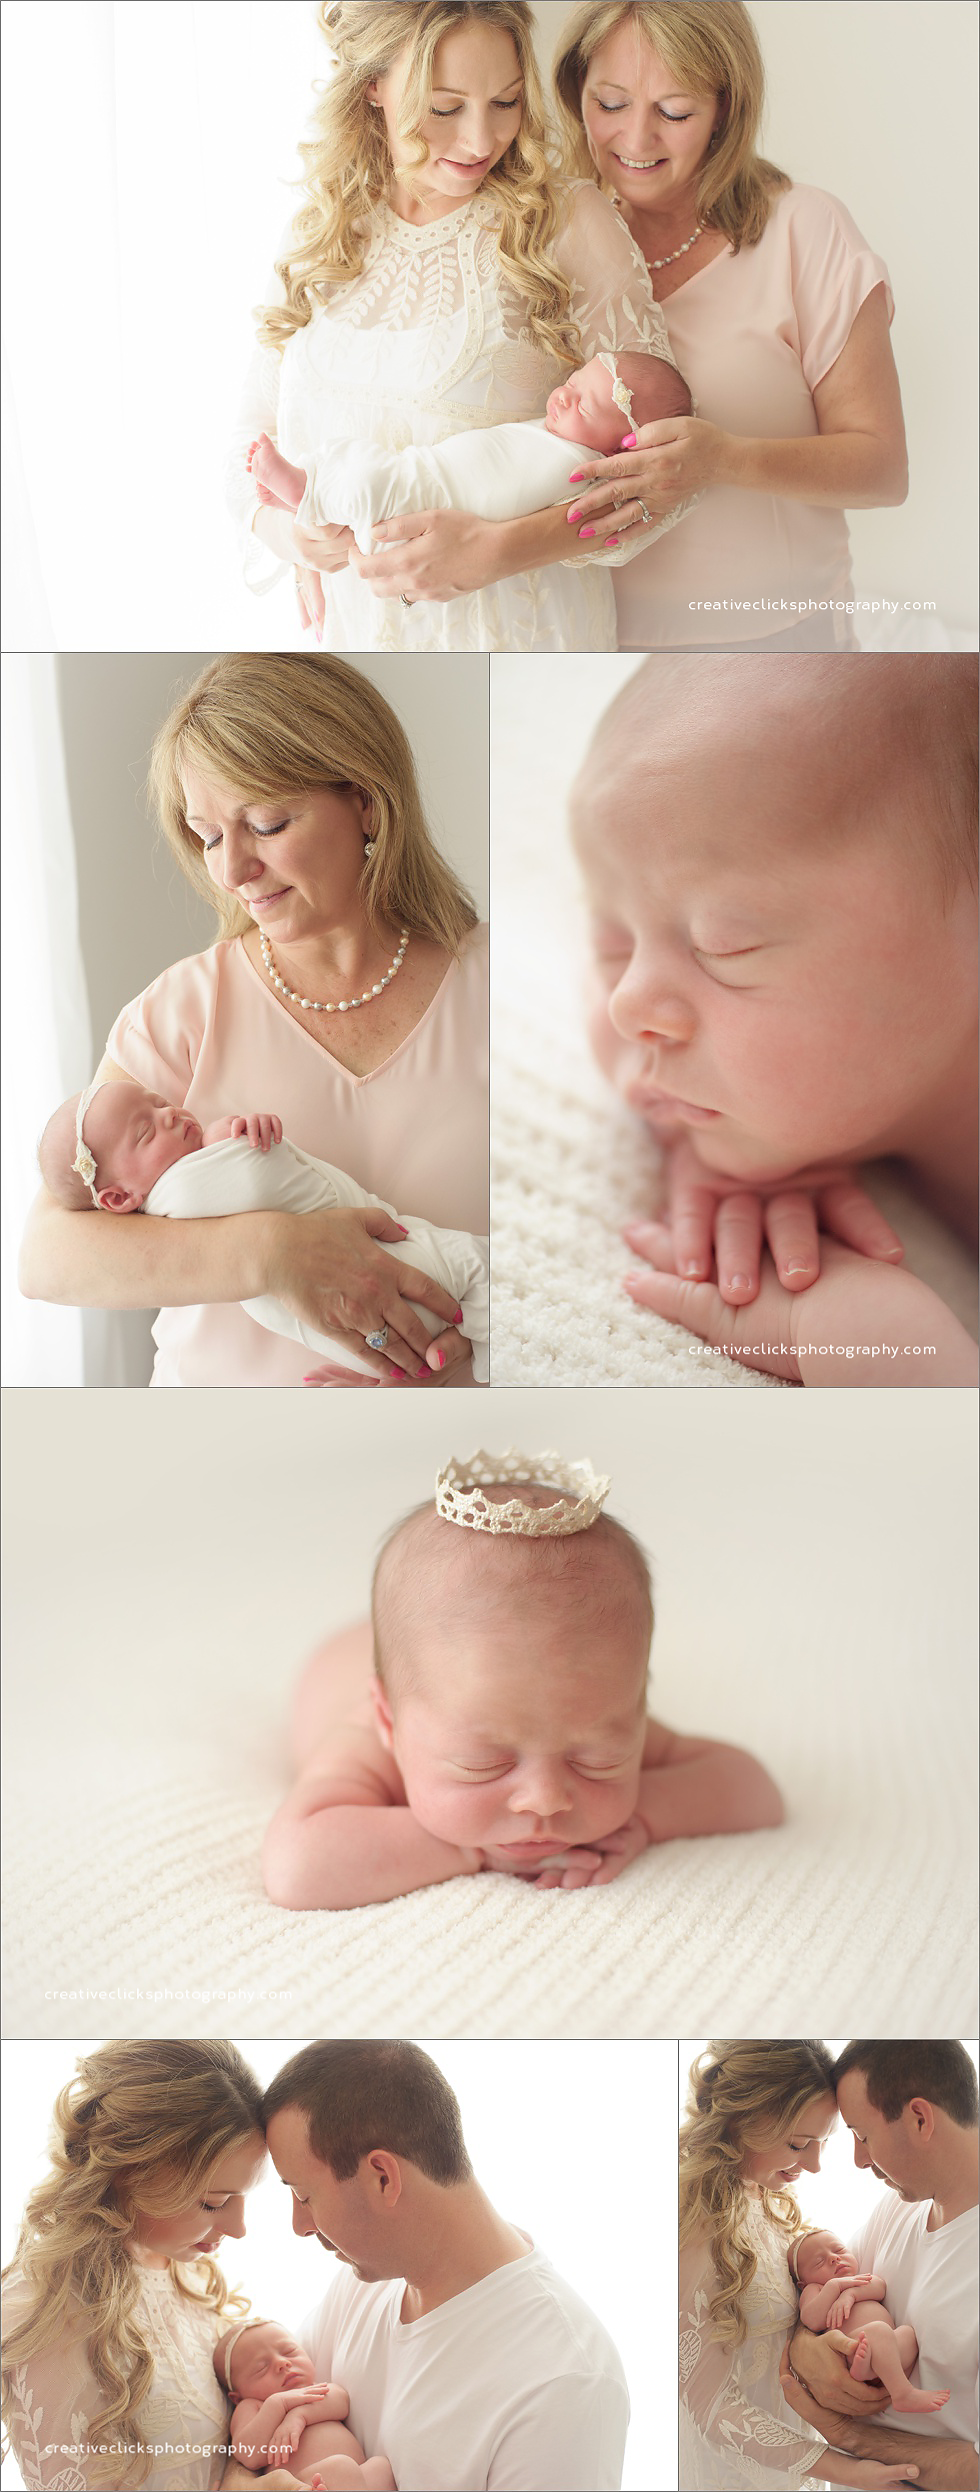 parent and grandparents images with newborn baby girl